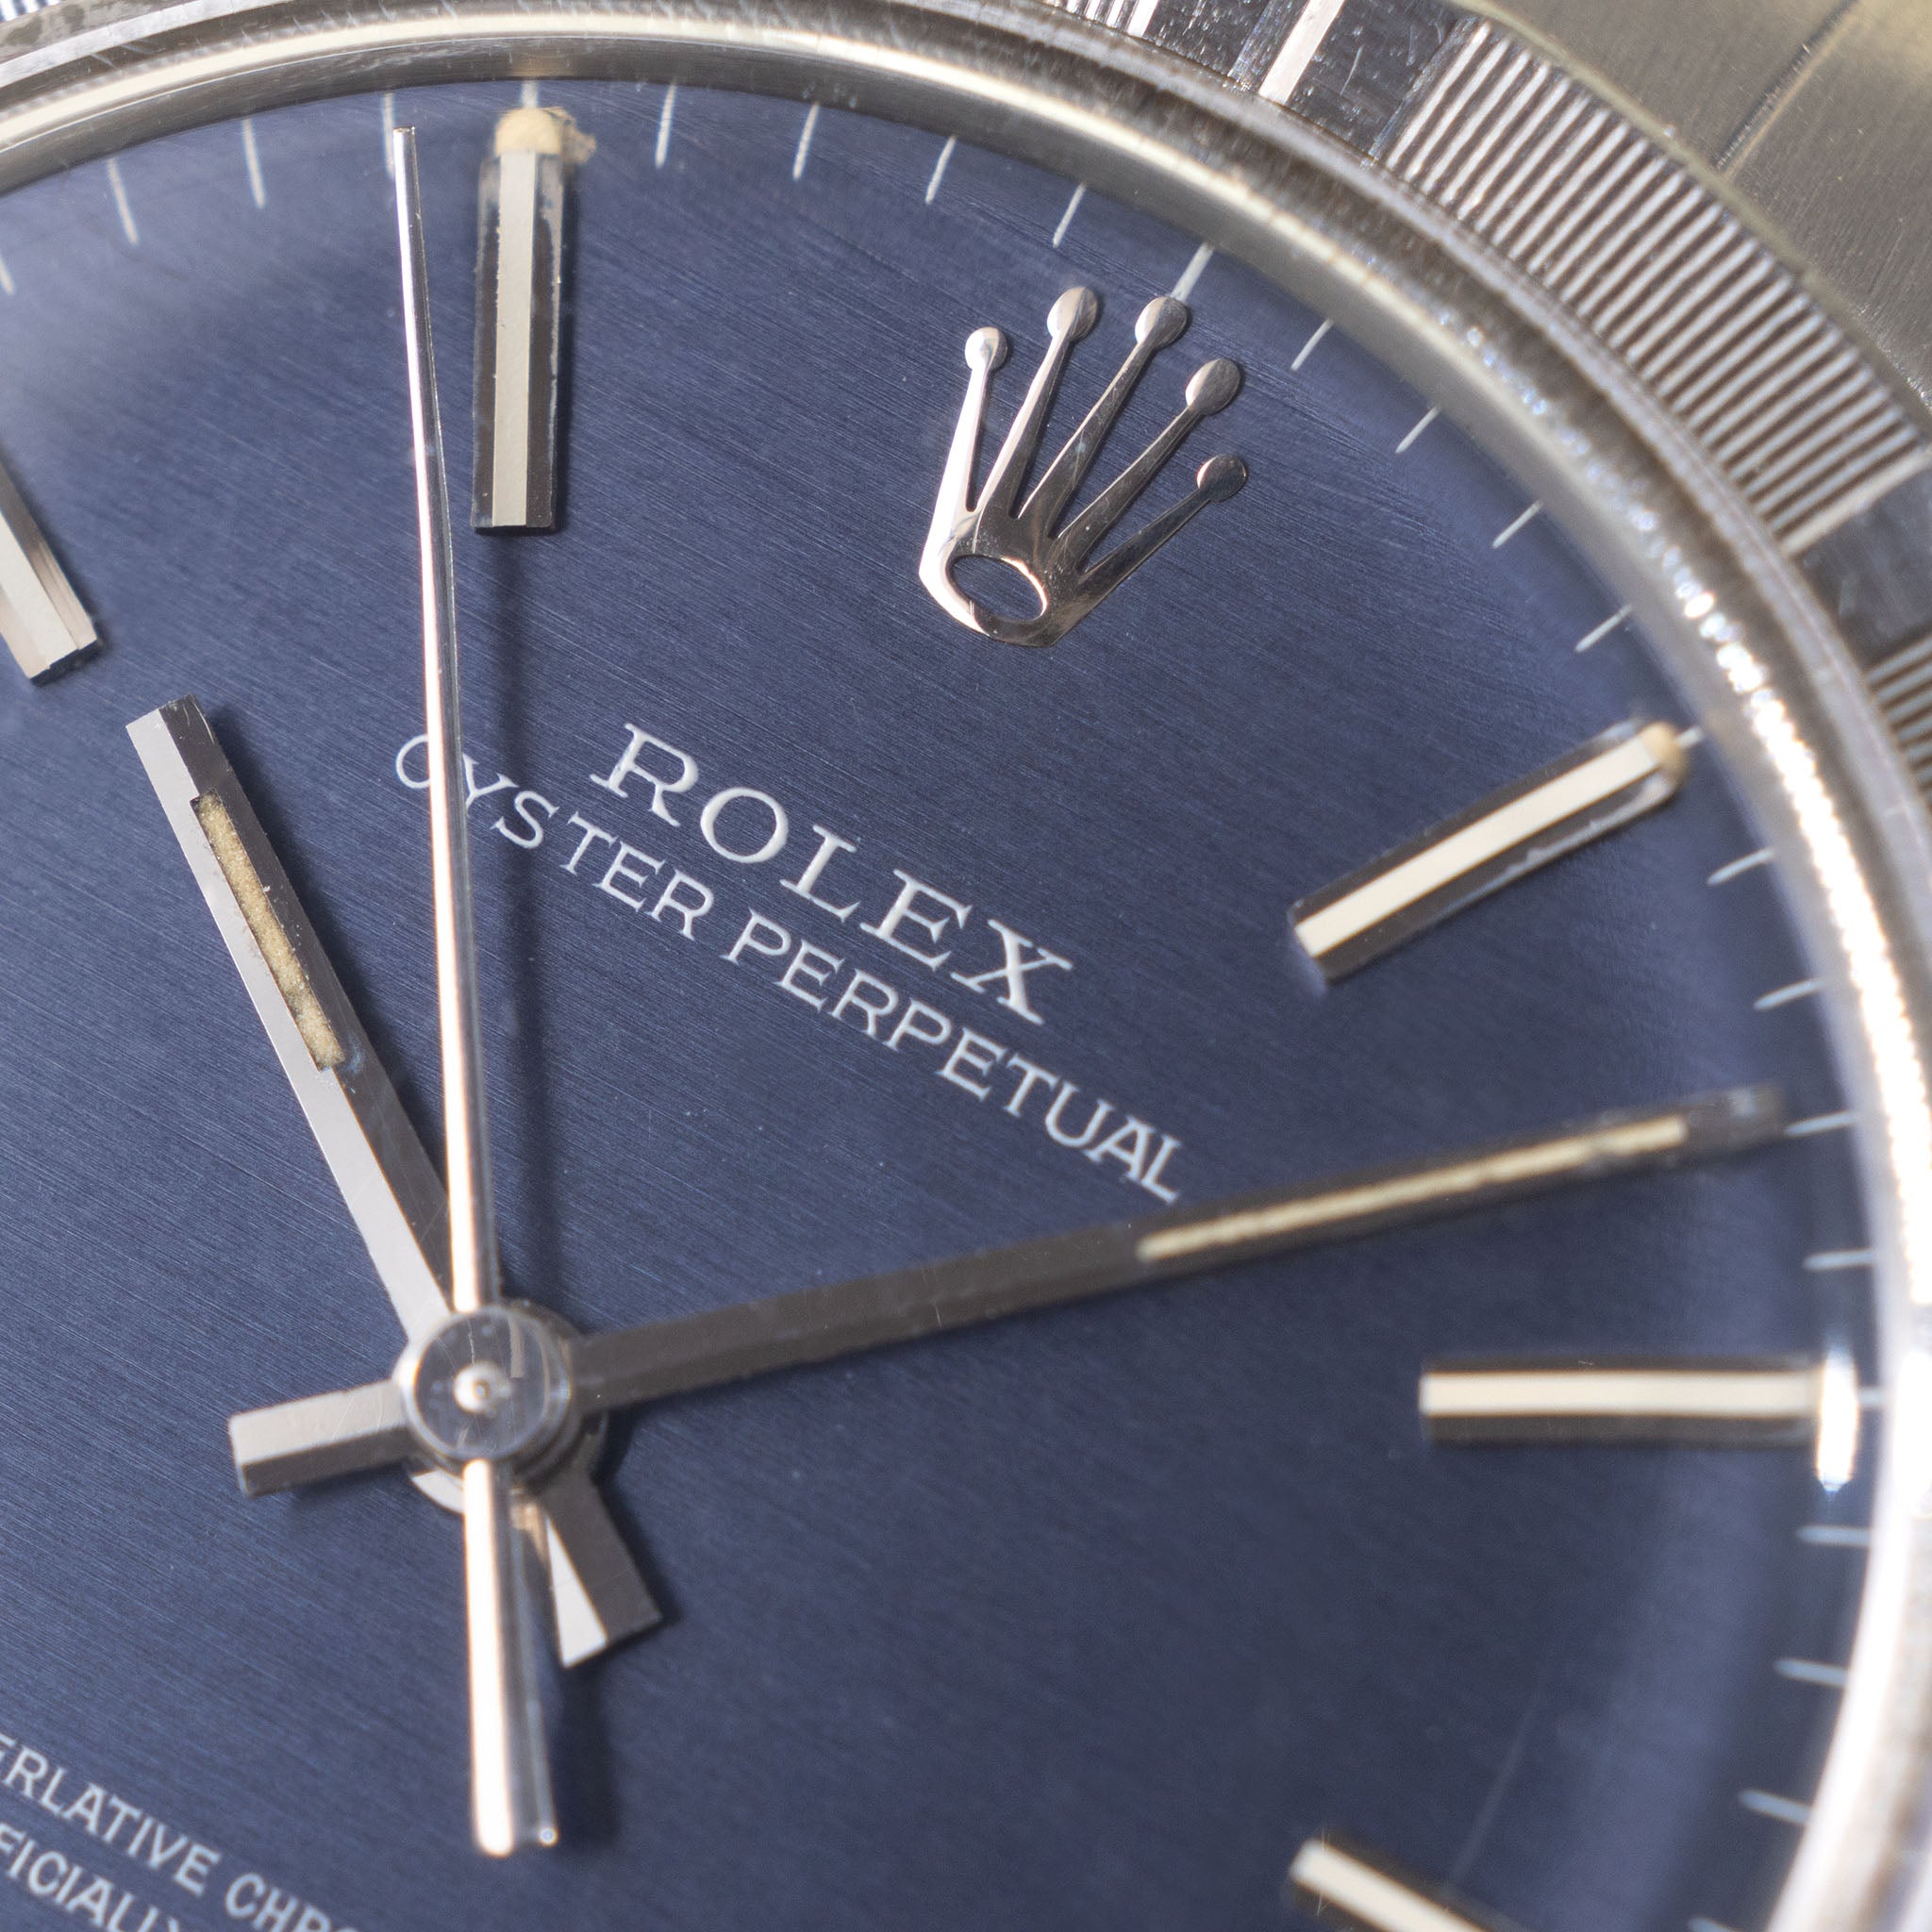 Rolex Oyster Perpetual Blue Horizontal Brushed Dial Ref 1007